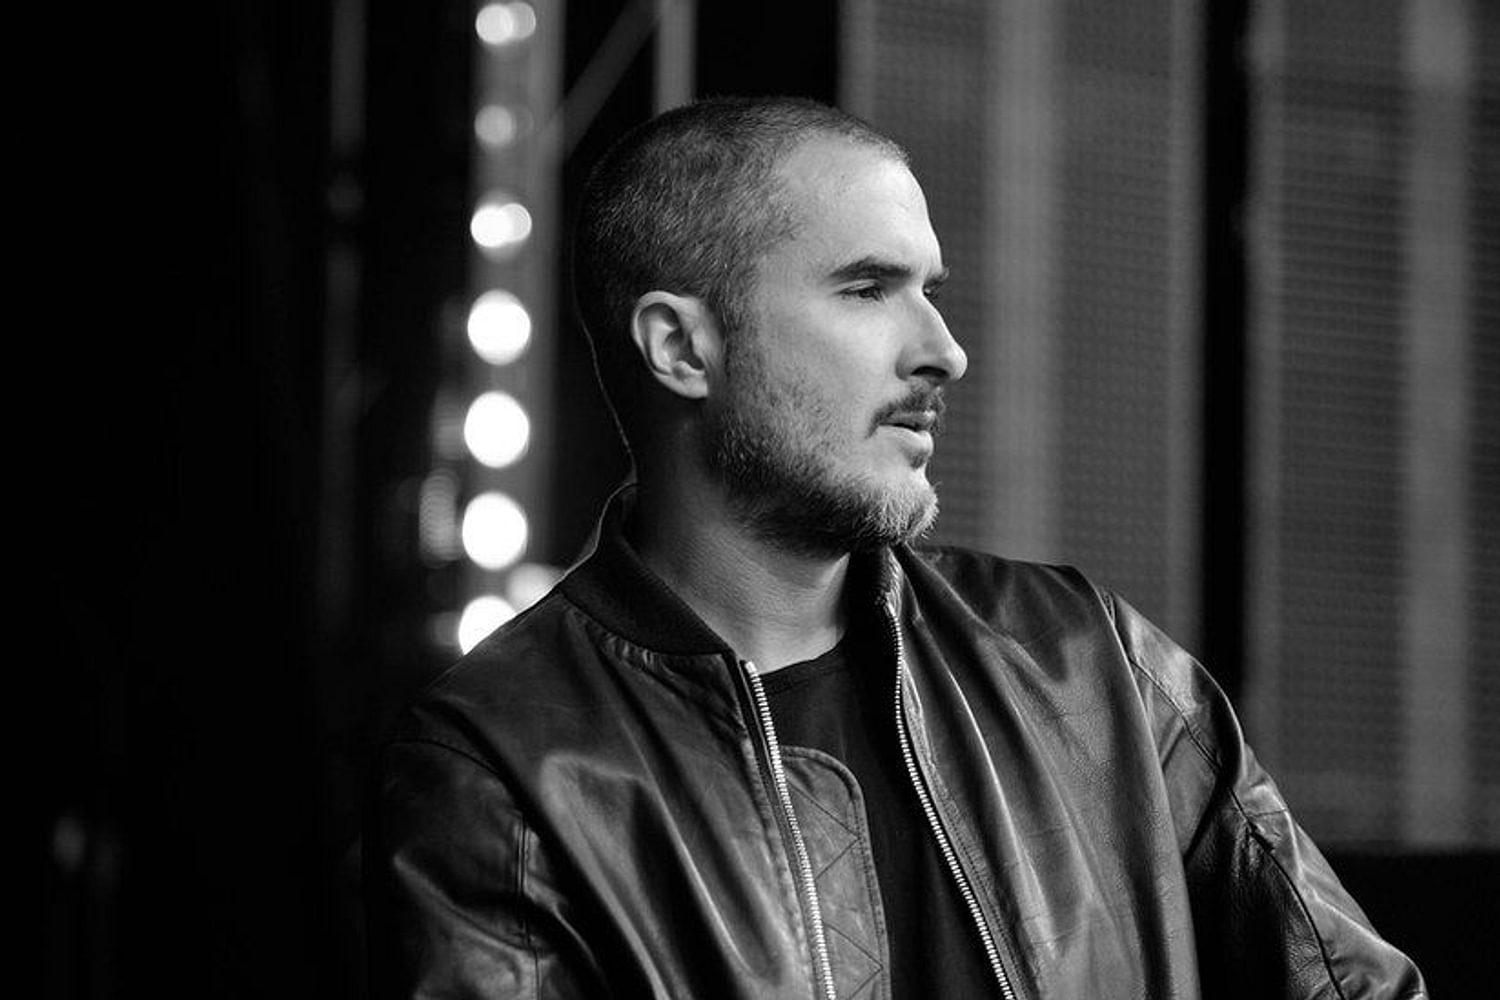 Zane Lowe’s first Beats 1 show, reviewed: “There’s nobody on the planet who does event radio better”